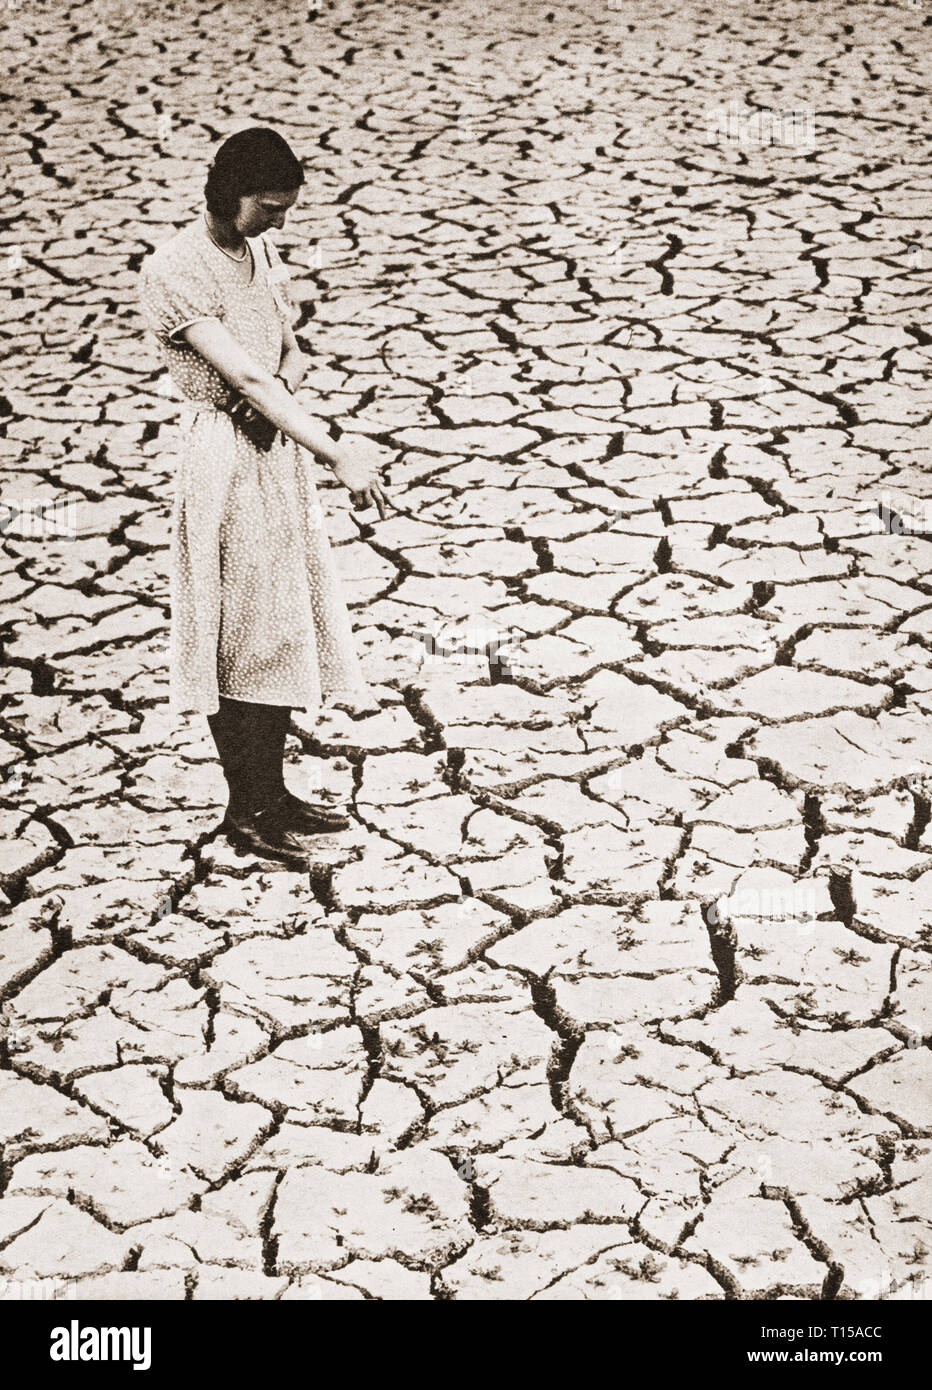 Following a dry summer in 1933, the heart wave of June and July, the following year resulted in a water shortage as reservoirs dried out, like that in Tring, Hertfordshire, England. Stock Photo